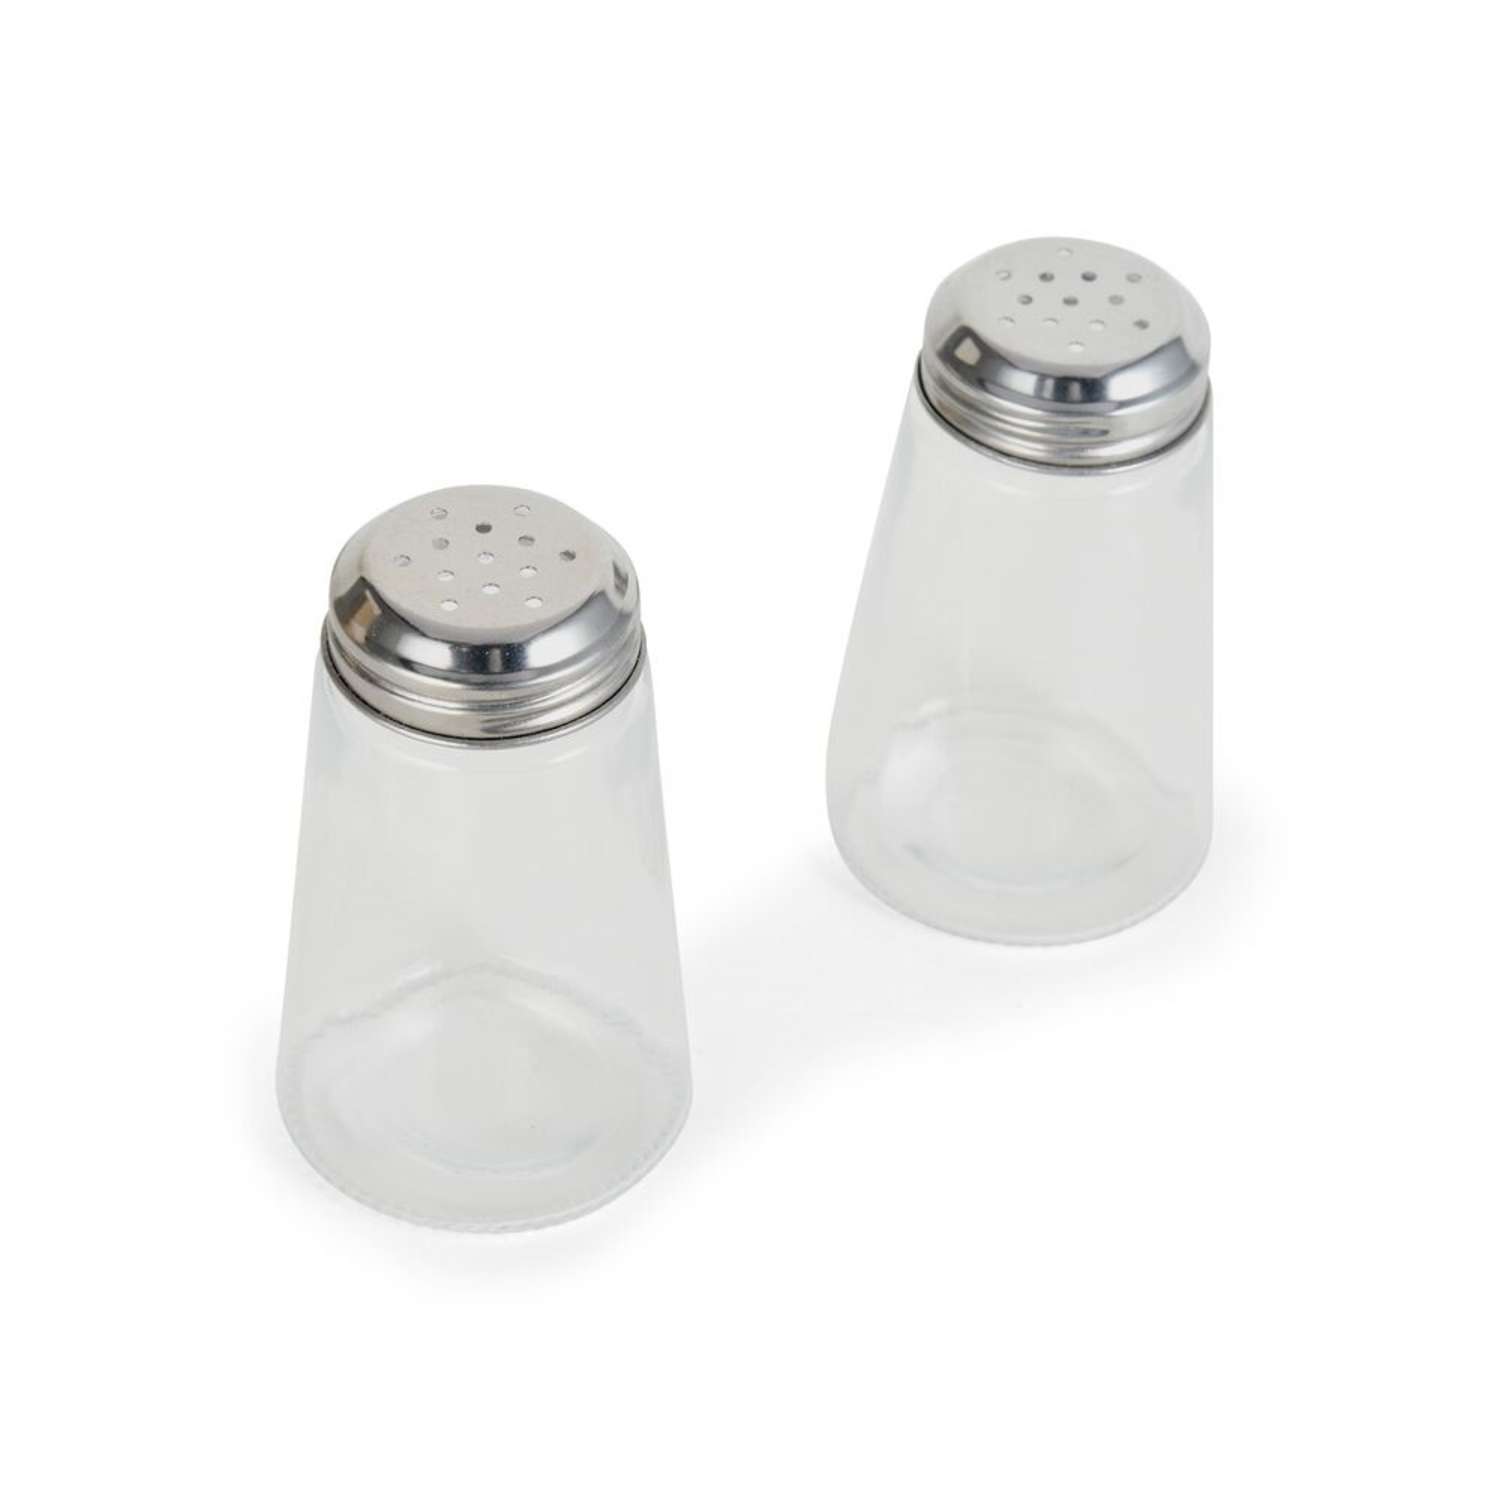 Salt and Pepper Shakers with Adjustable Pour Hole, 3 Oz Salt